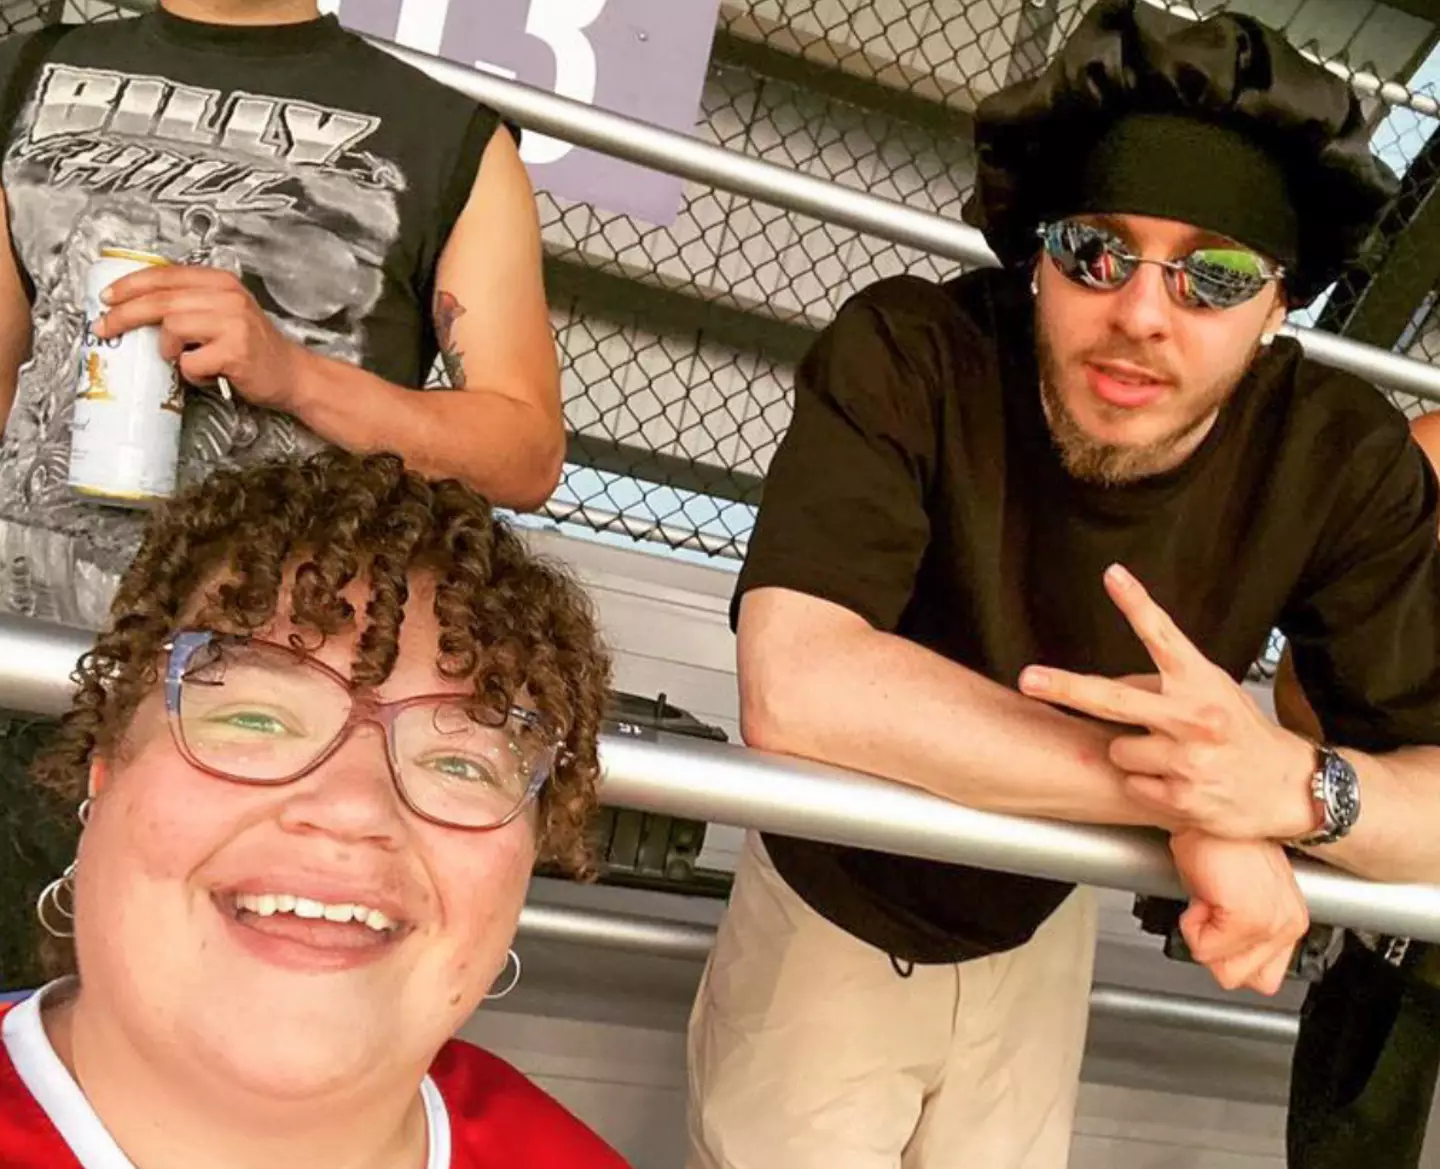 Jack Harlow was pictured wearing a bonnet to a soccer game this weekend.